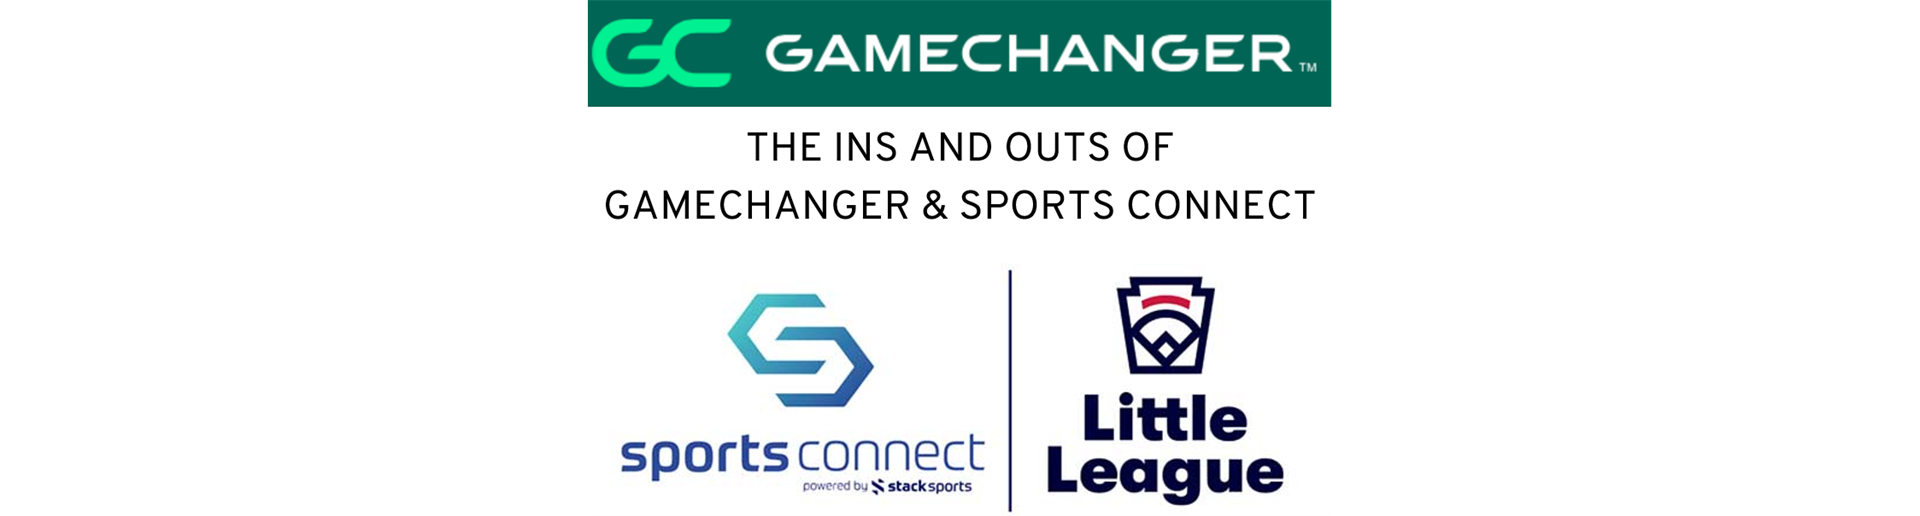 THE INS AND OUTS OF GAMECHANGER & SPORTS CONNECT